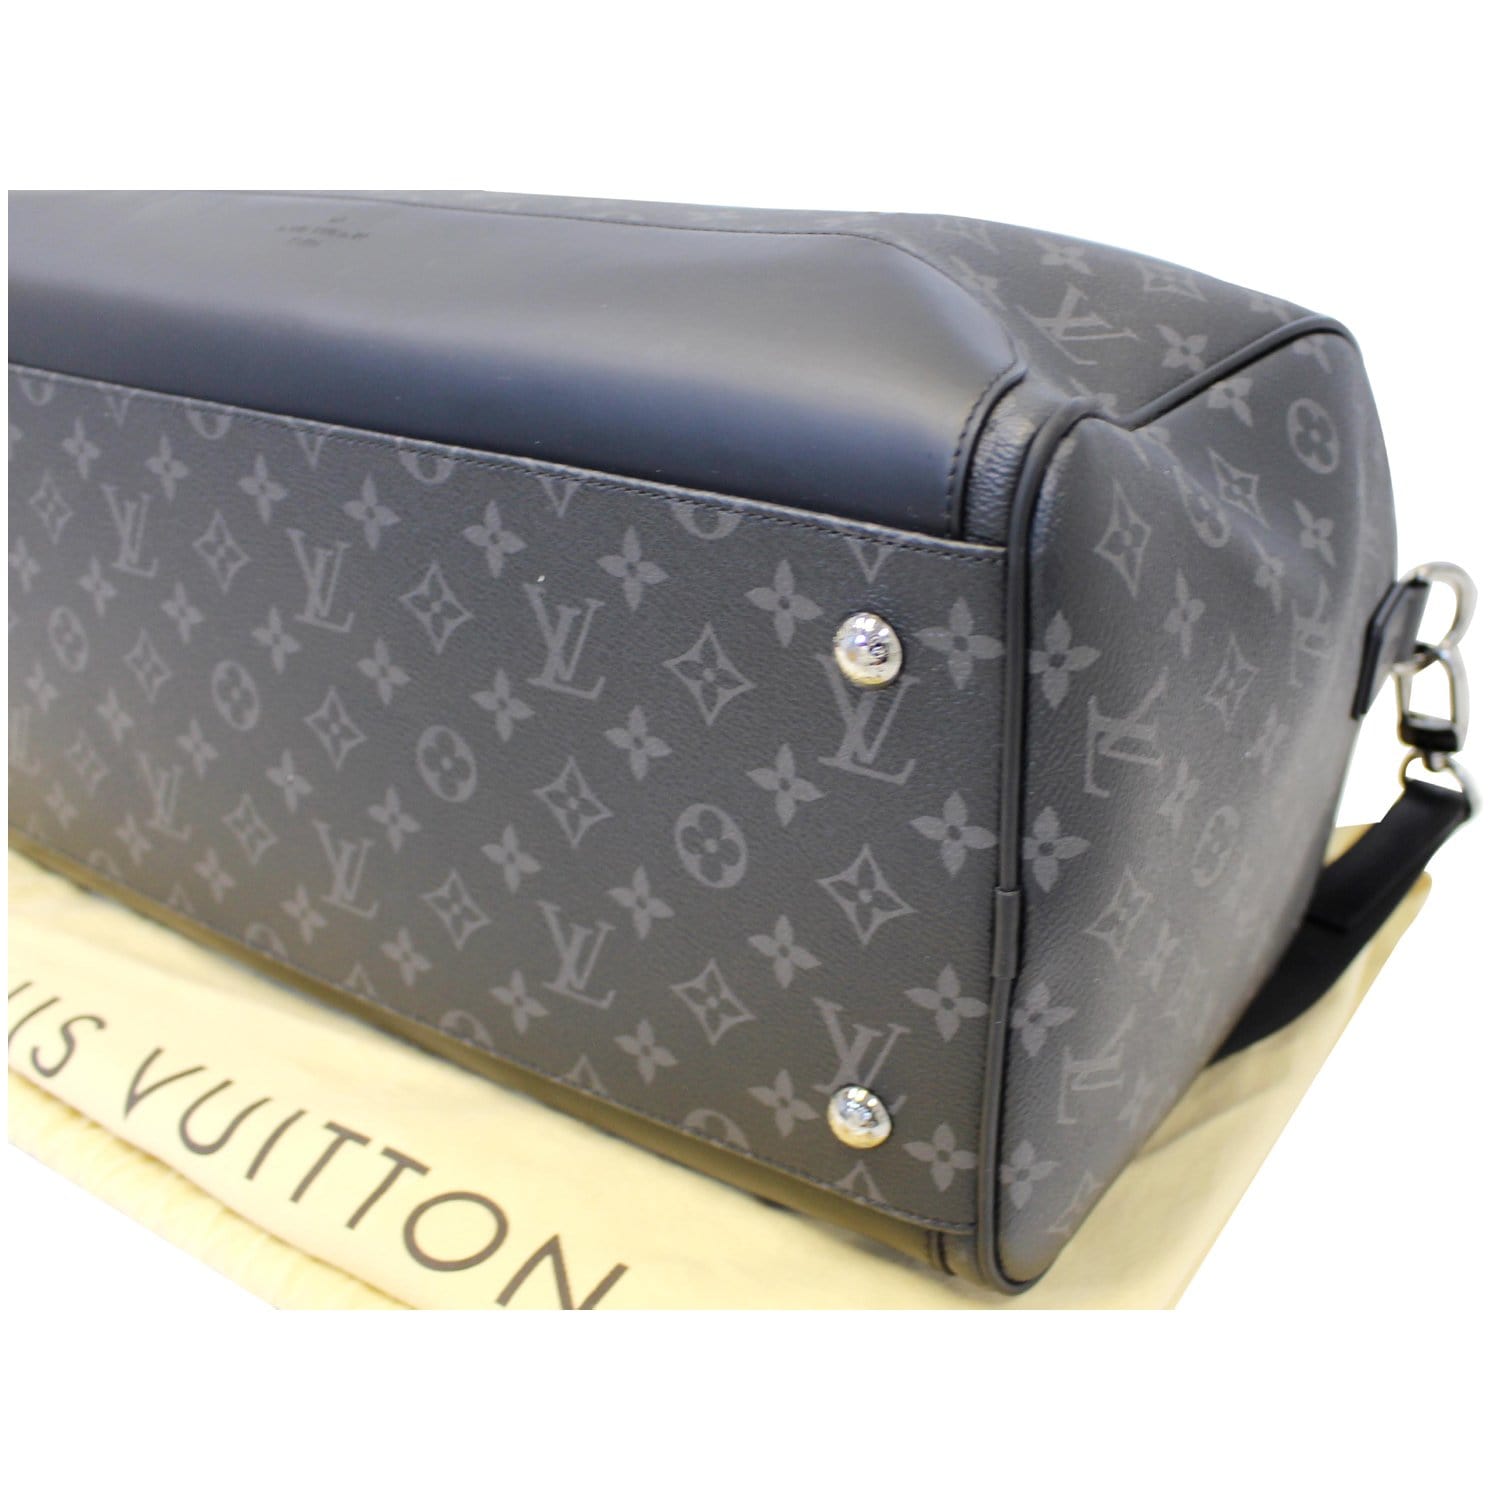 Louis Vuitton Voyager Tote Bags for Women